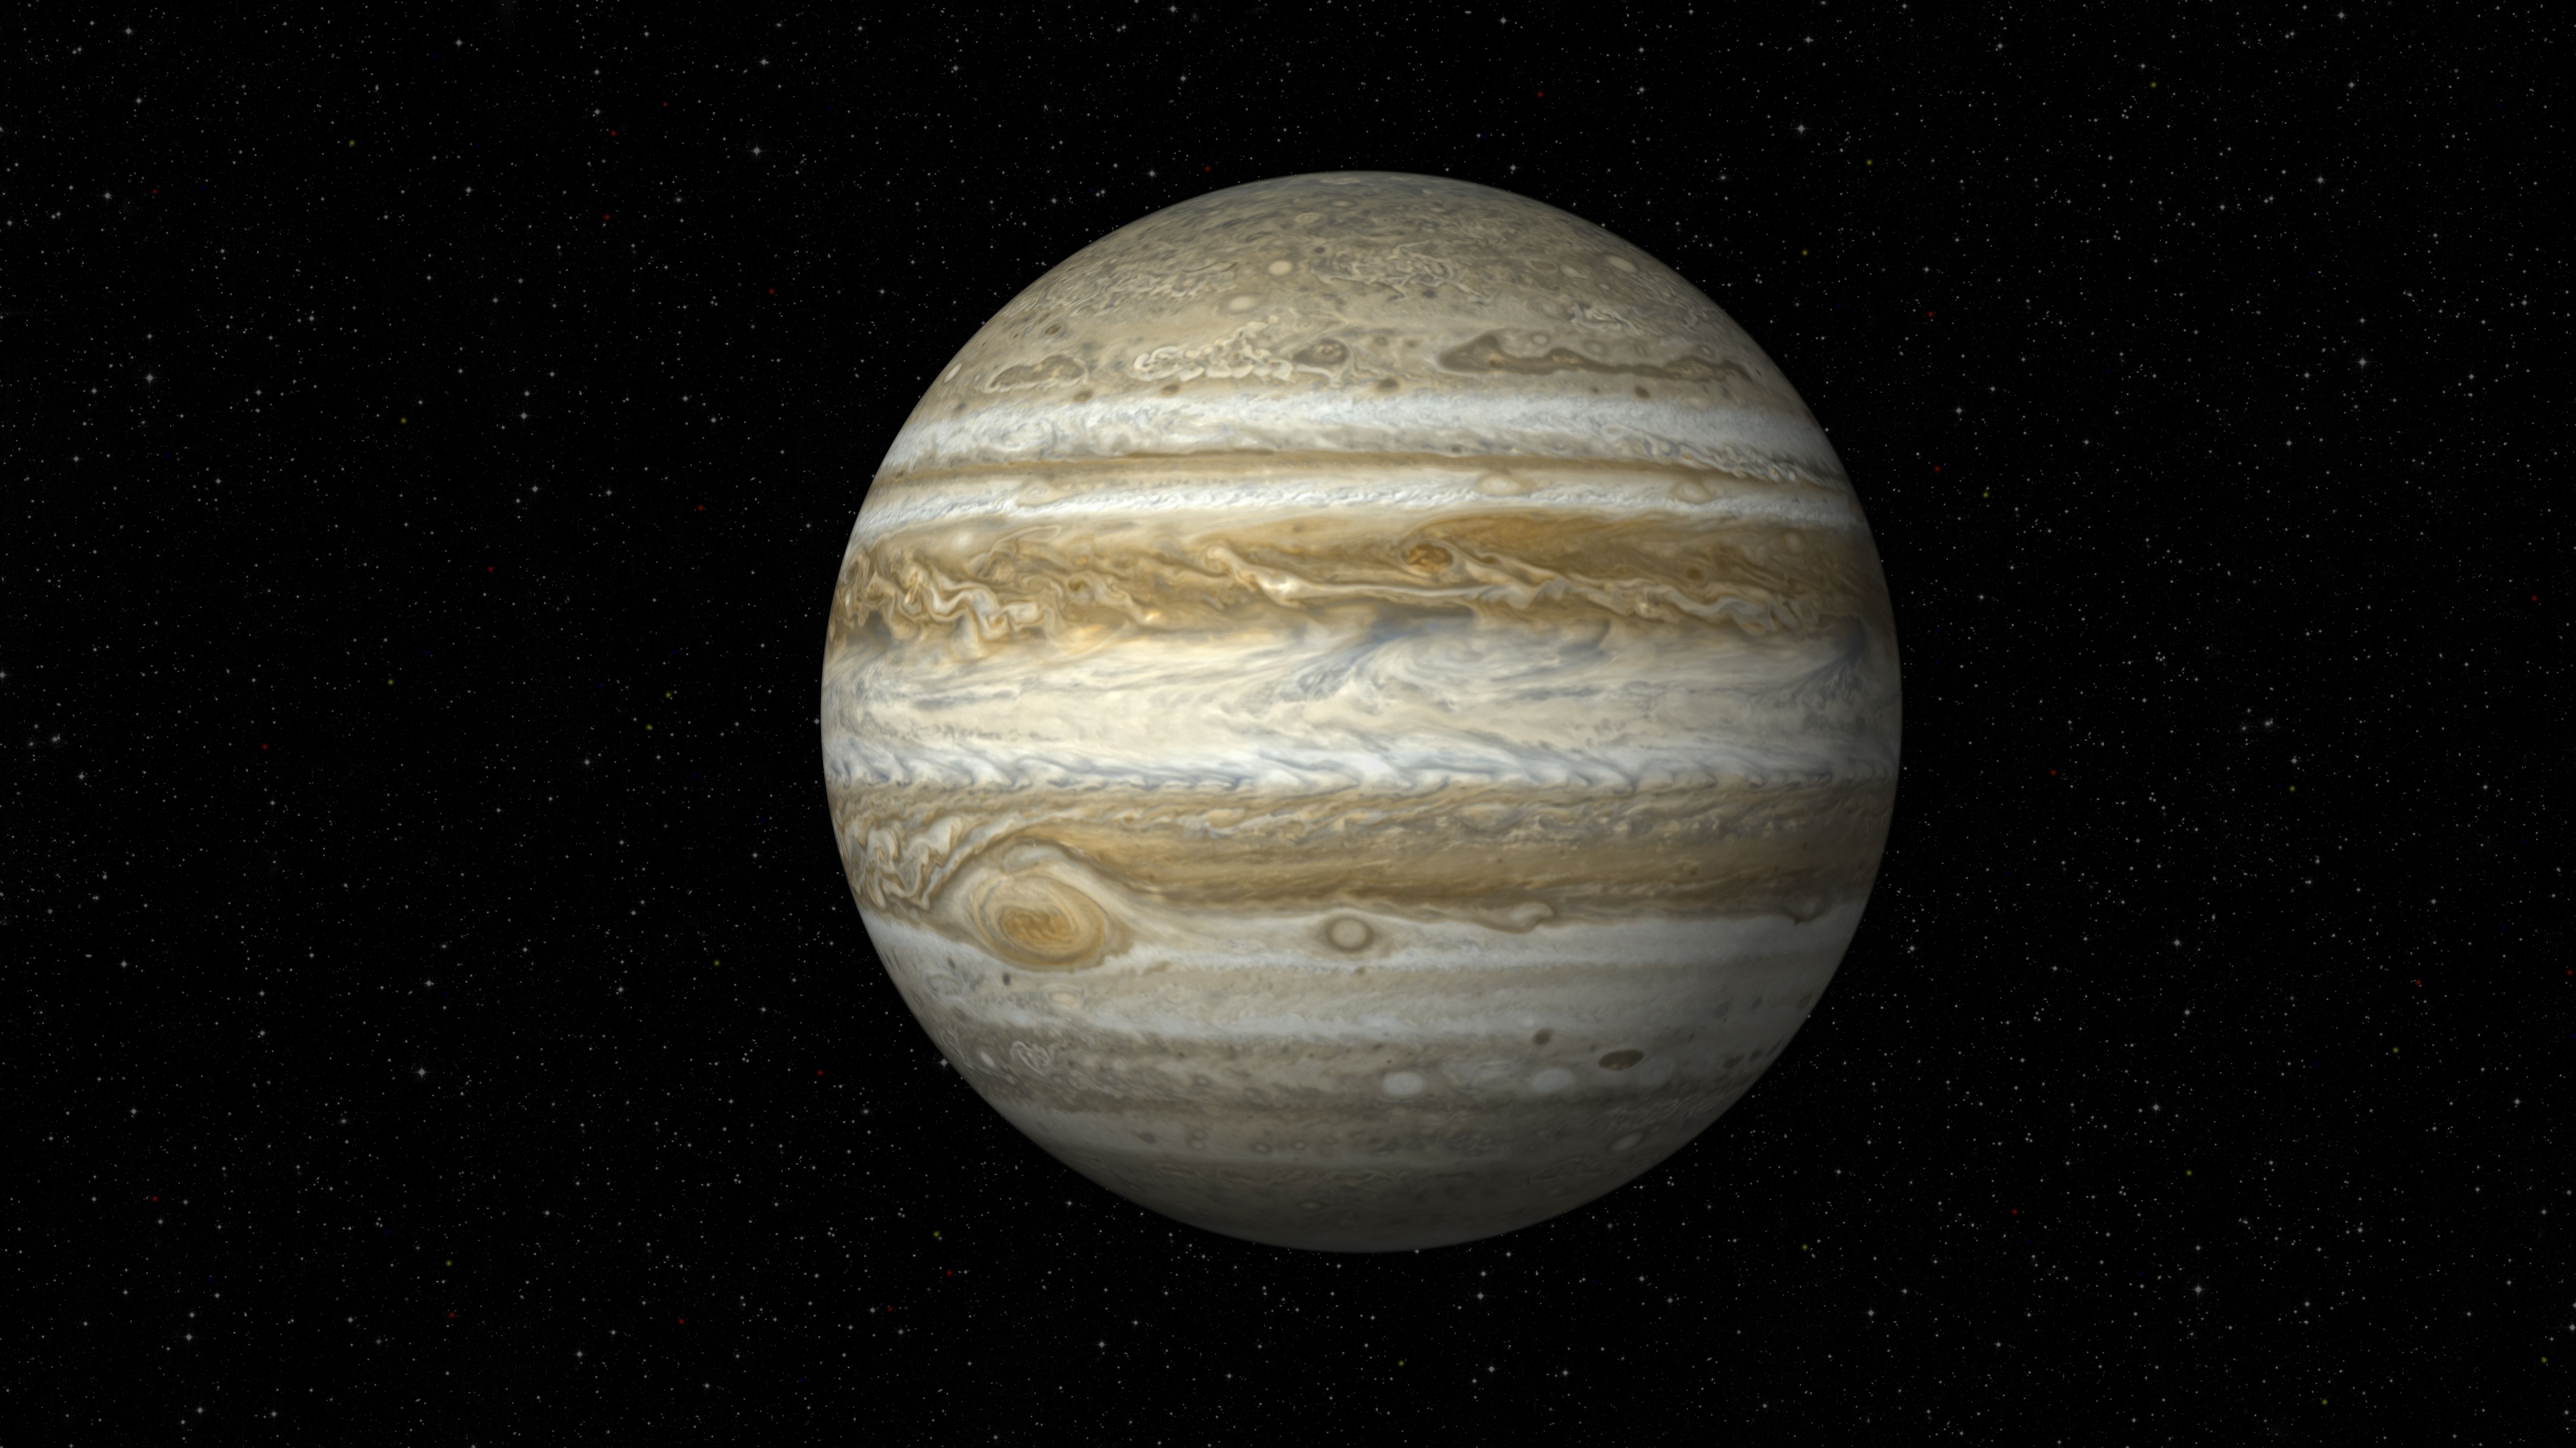 You'll Be Able to See Jupiter's Moons With a Pair of ...